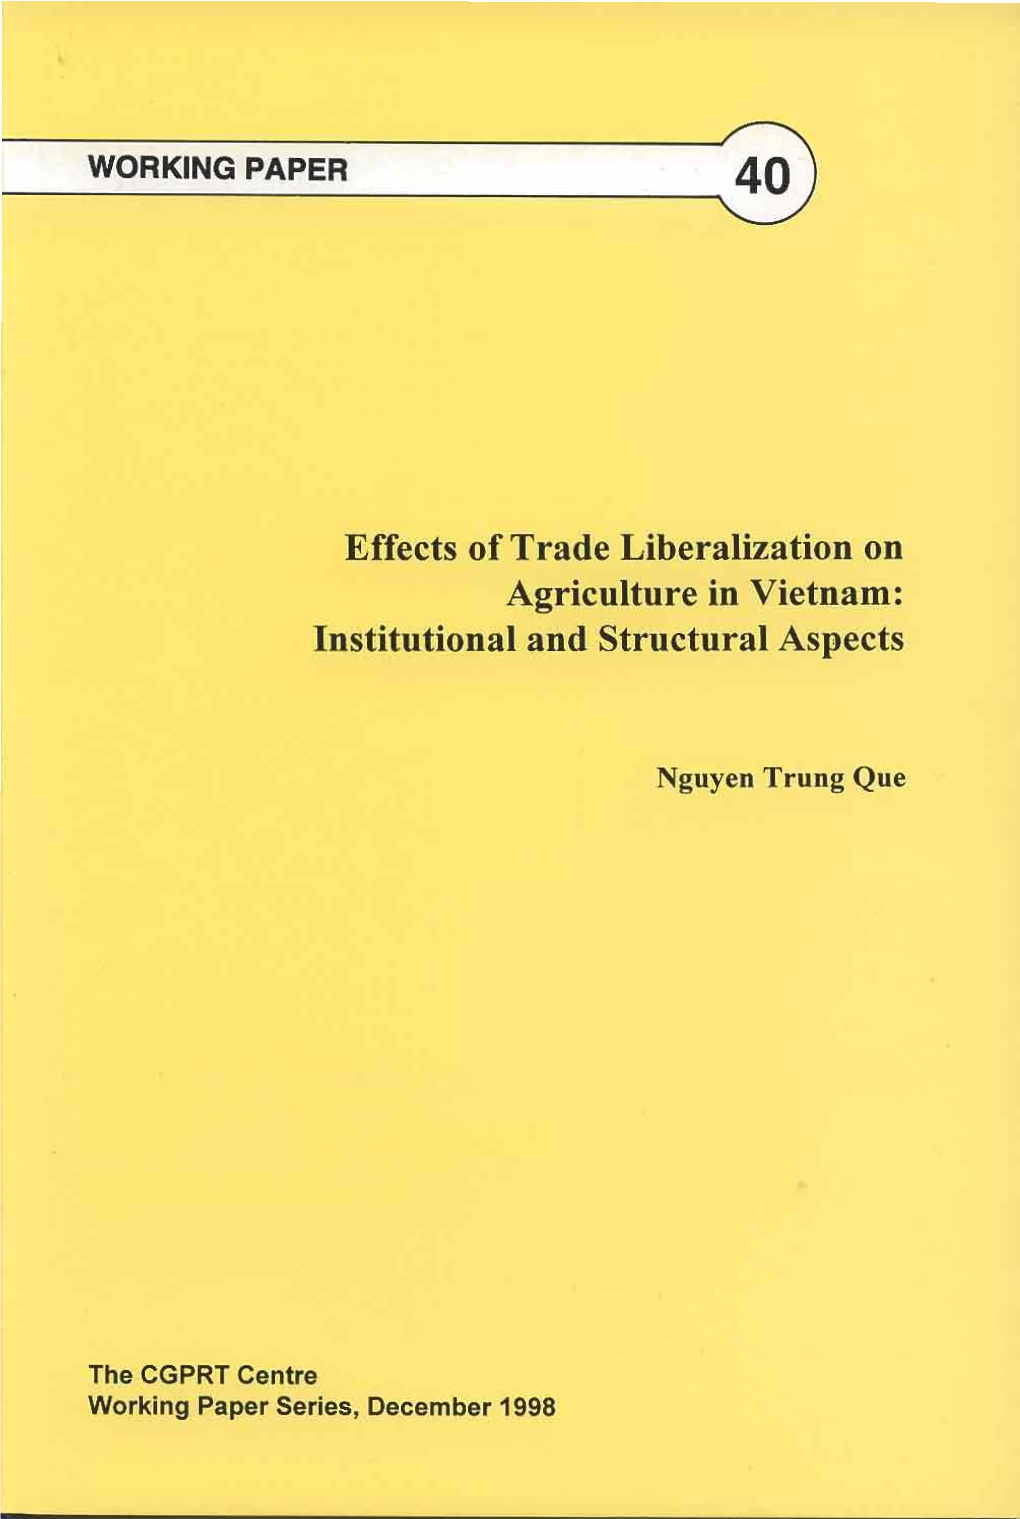 Effects of Trade Liberalization on Agriculture in Vietnam: Institutional and Structural Aspects